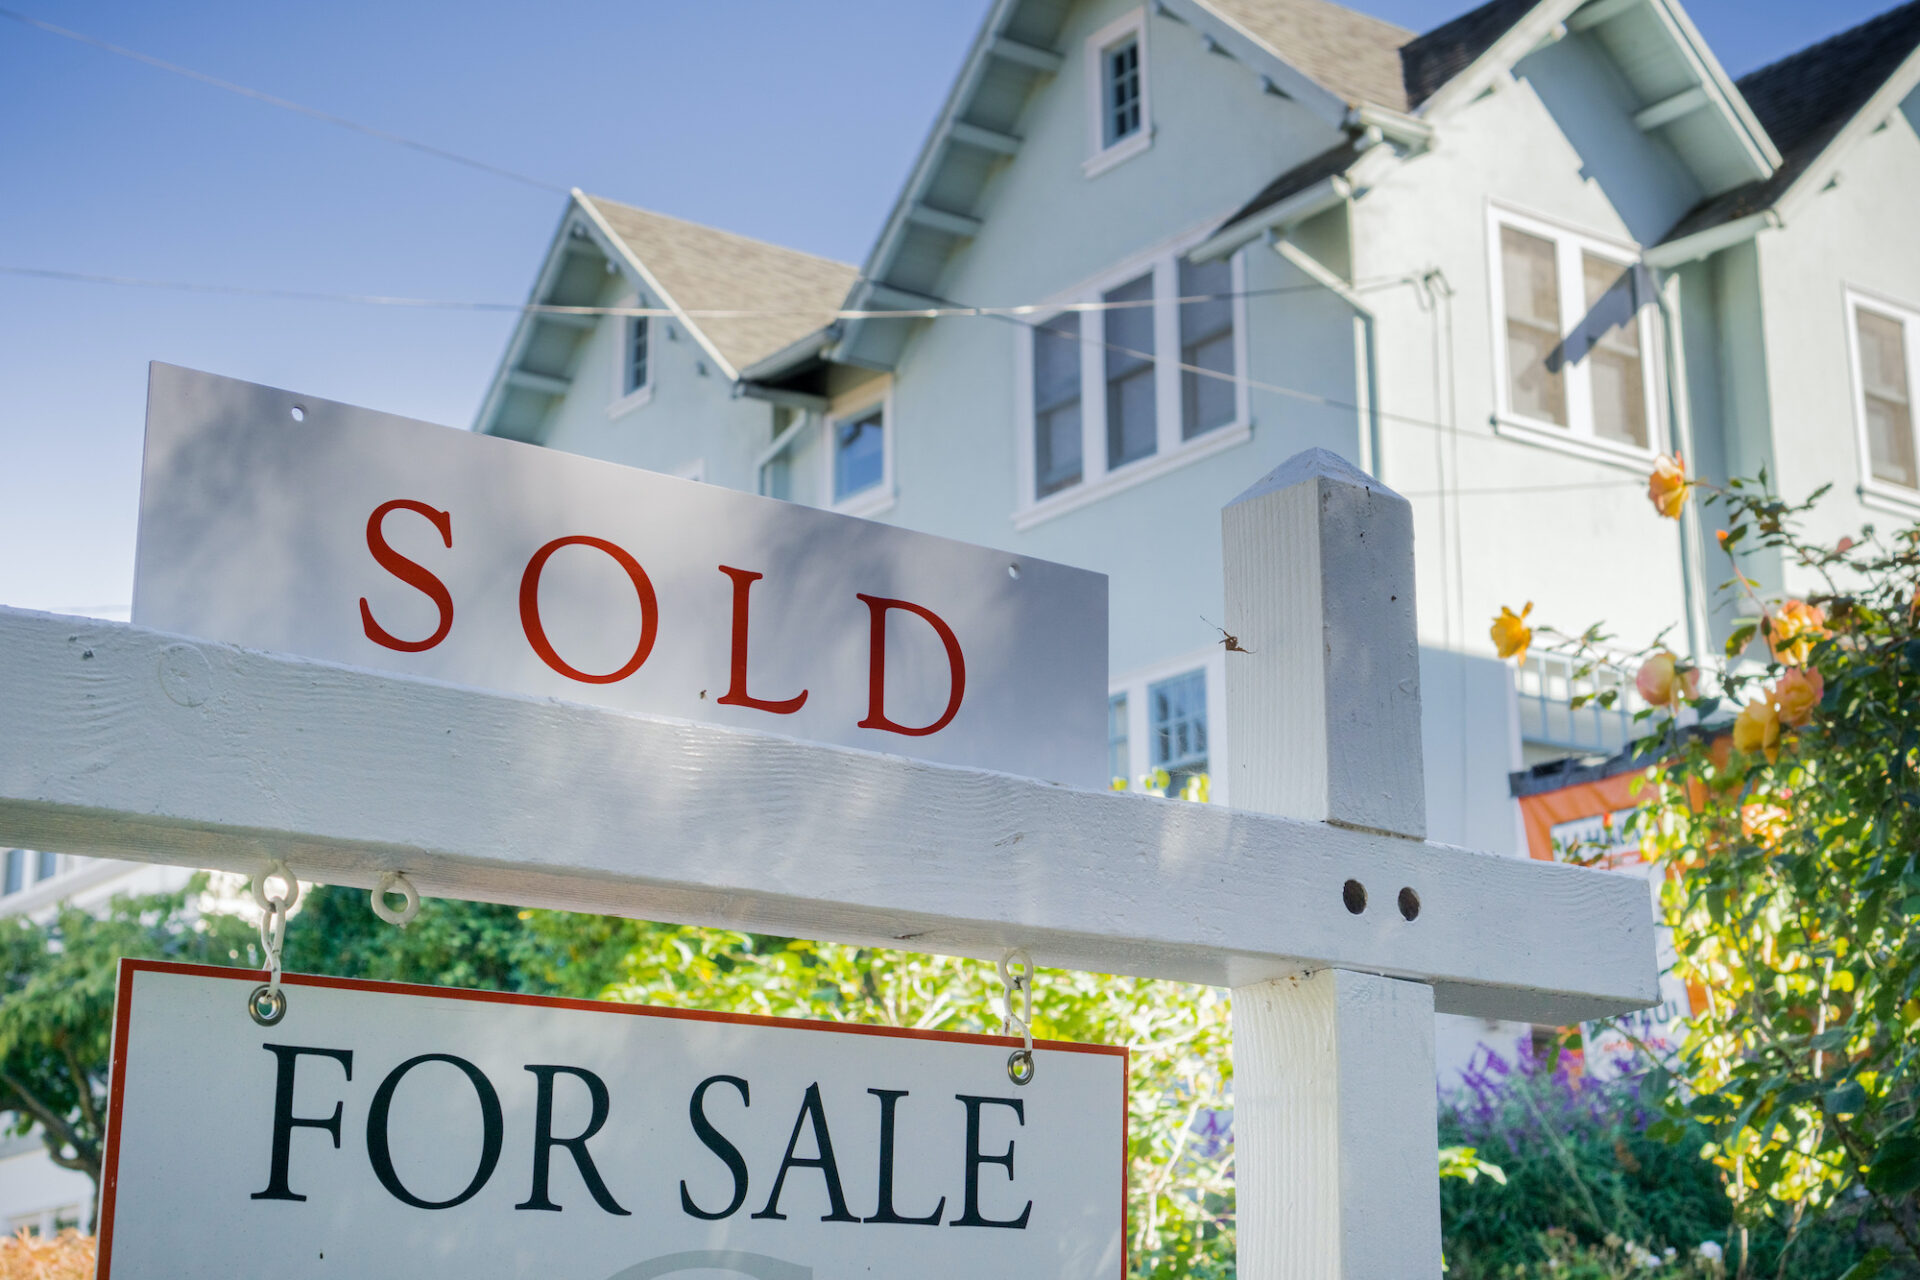 FHFA: Home Prices Rose 1.7% in May, Up 18% Year-to-Year